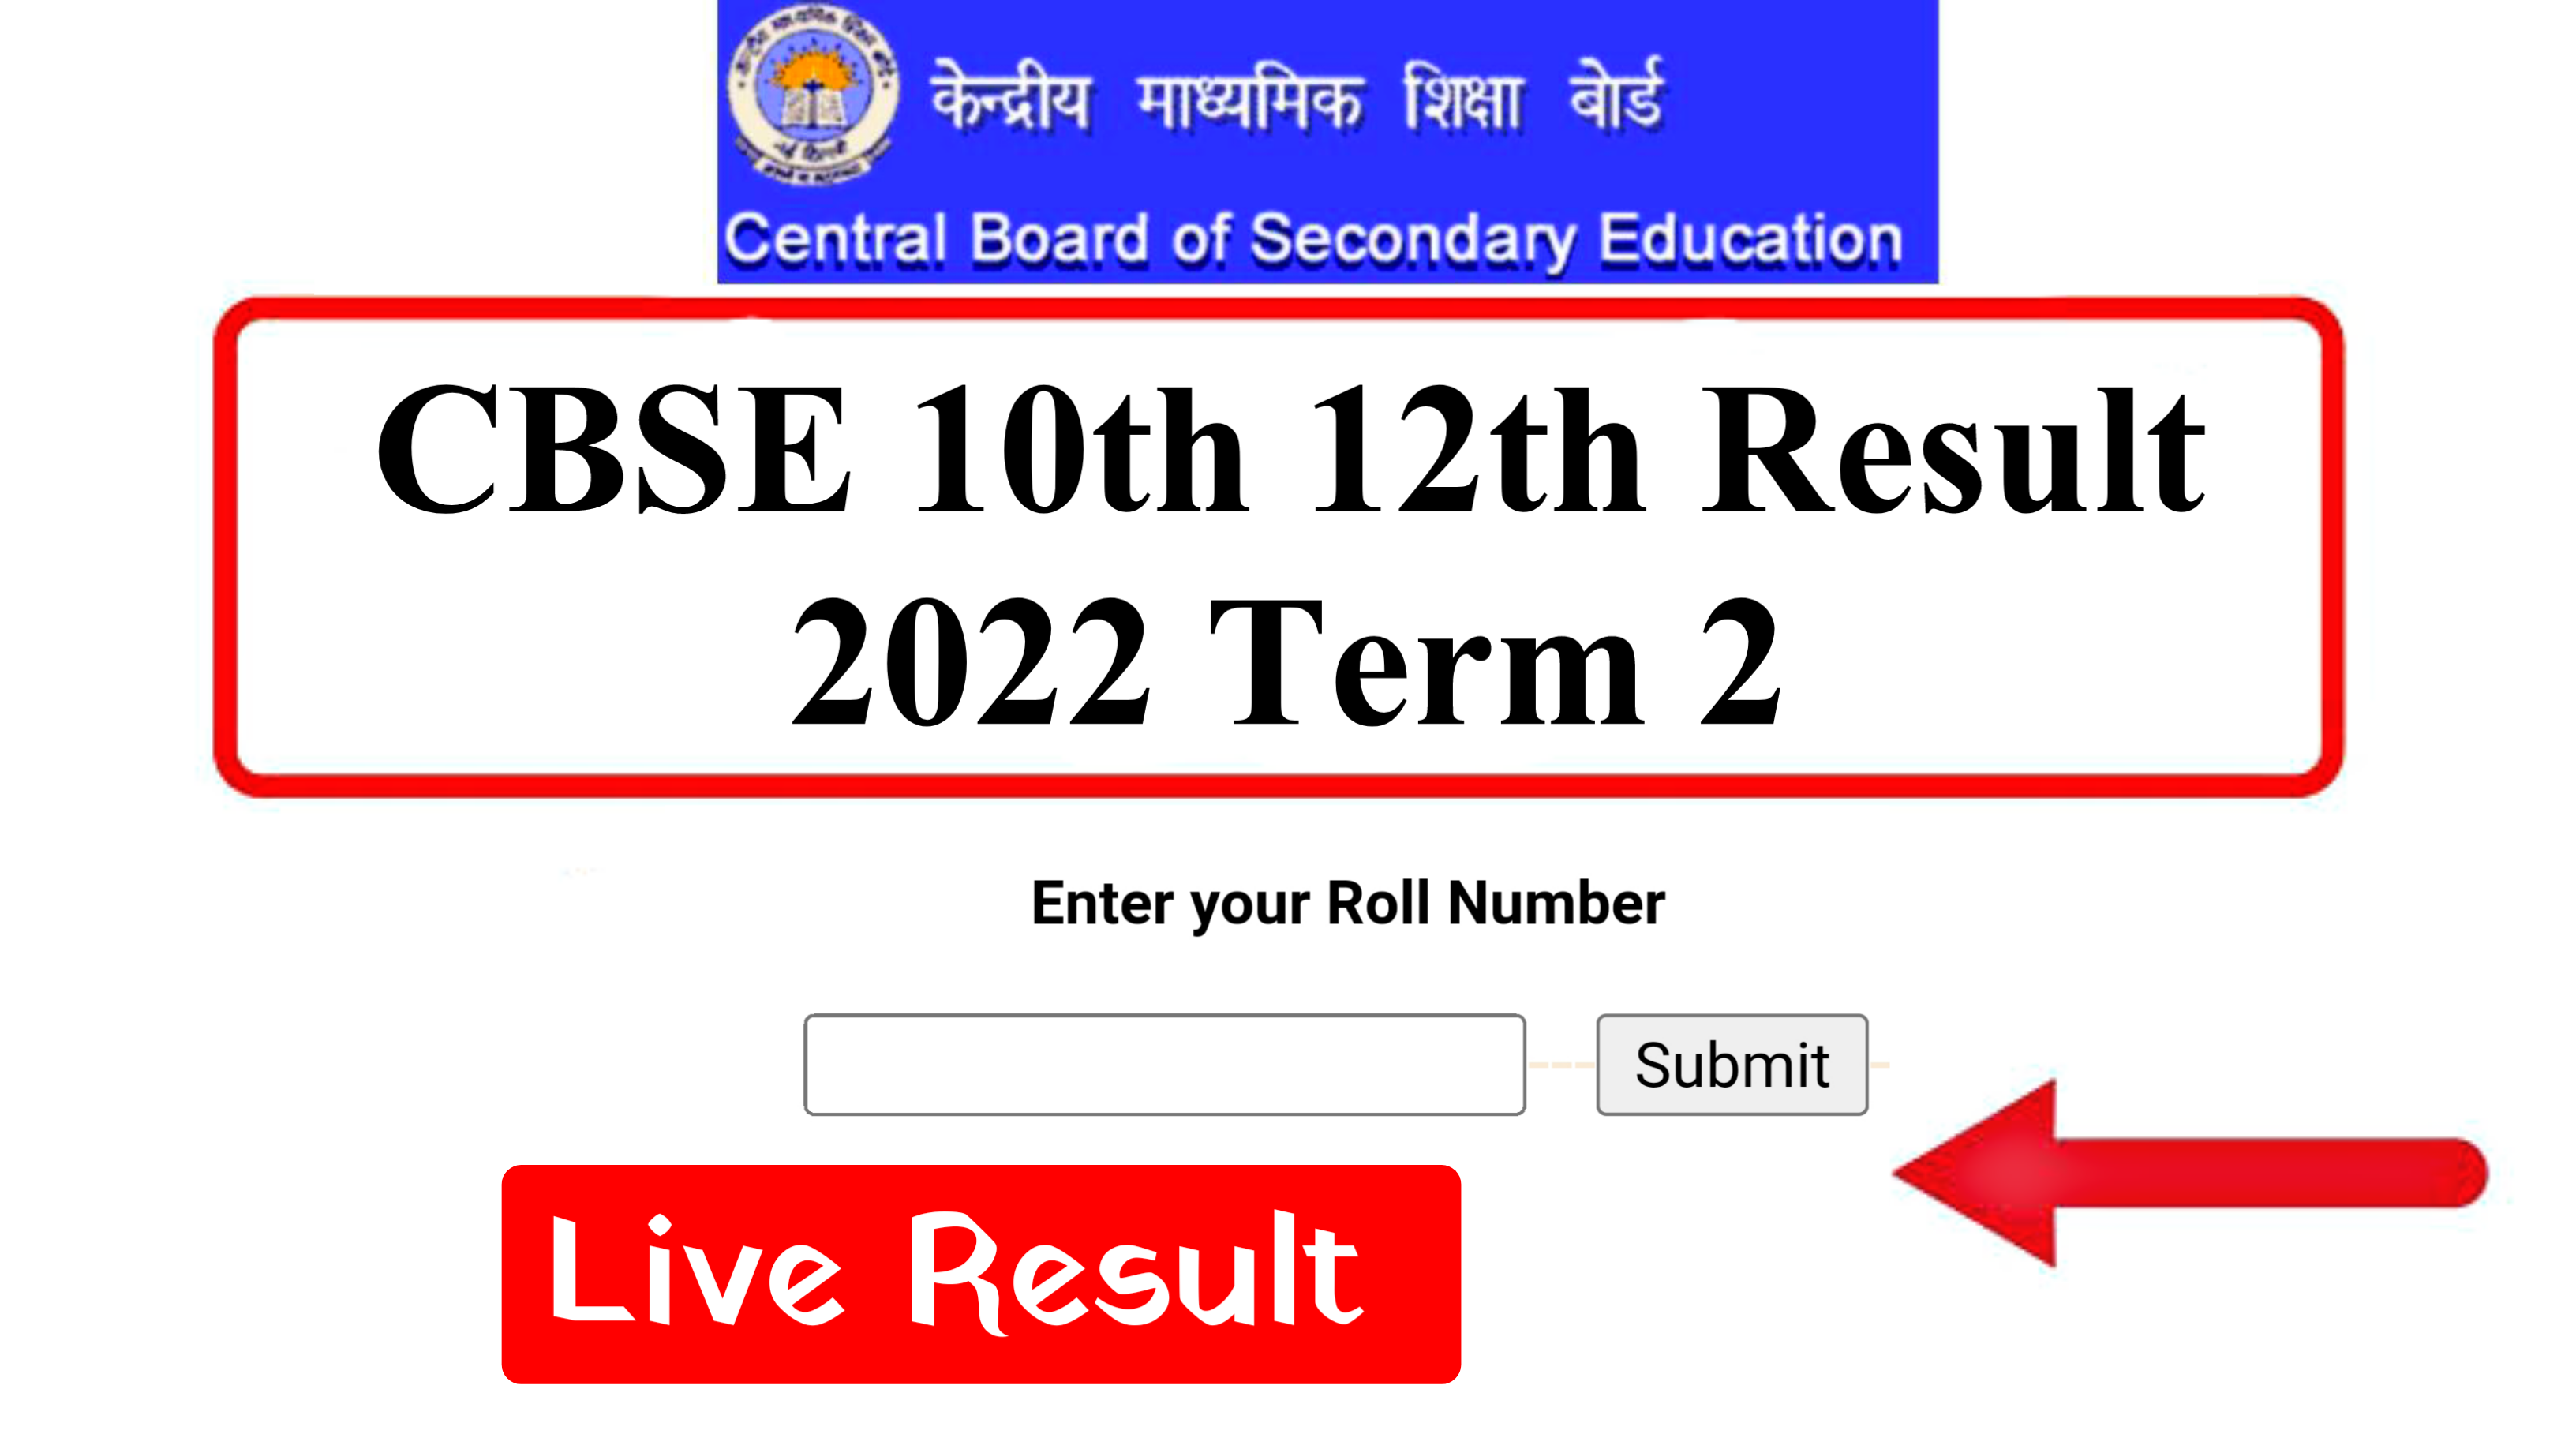 CBSE Result 2022 Out Today